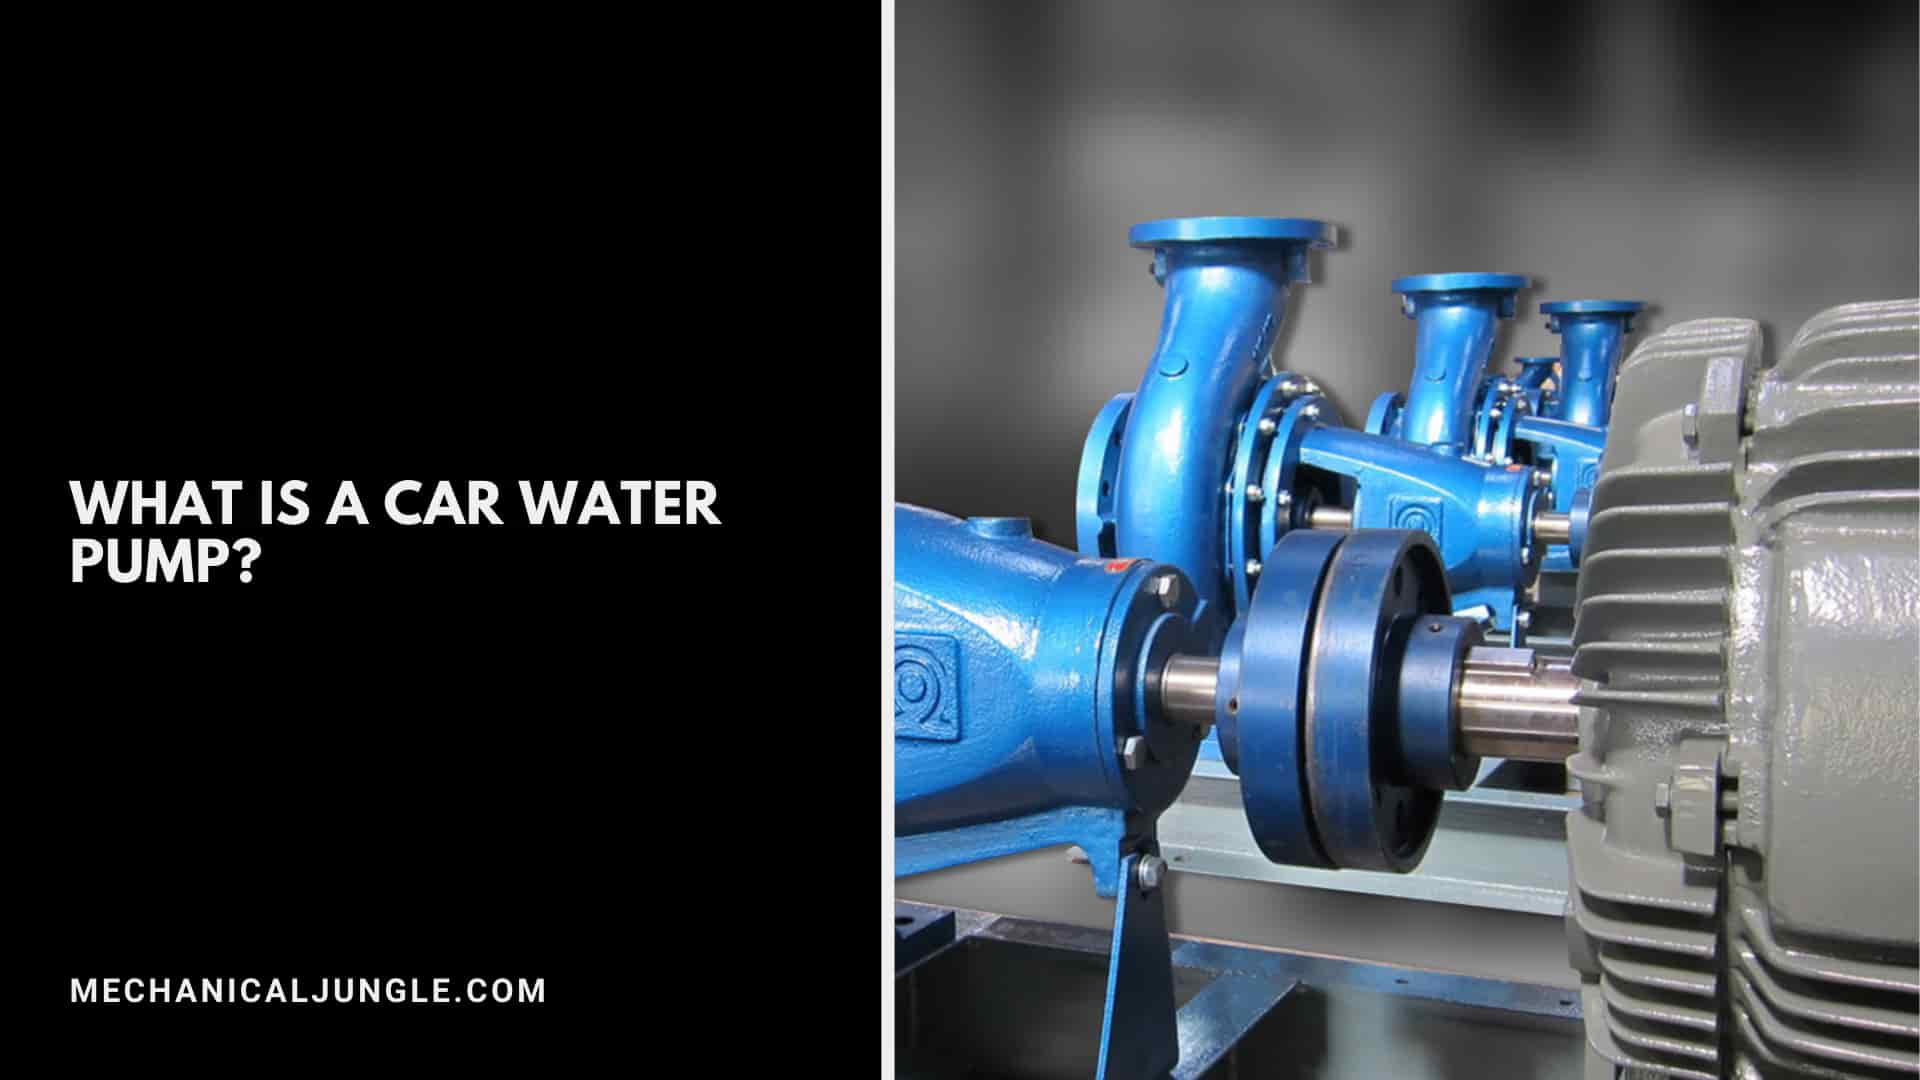 What Is a Car Water Pump?